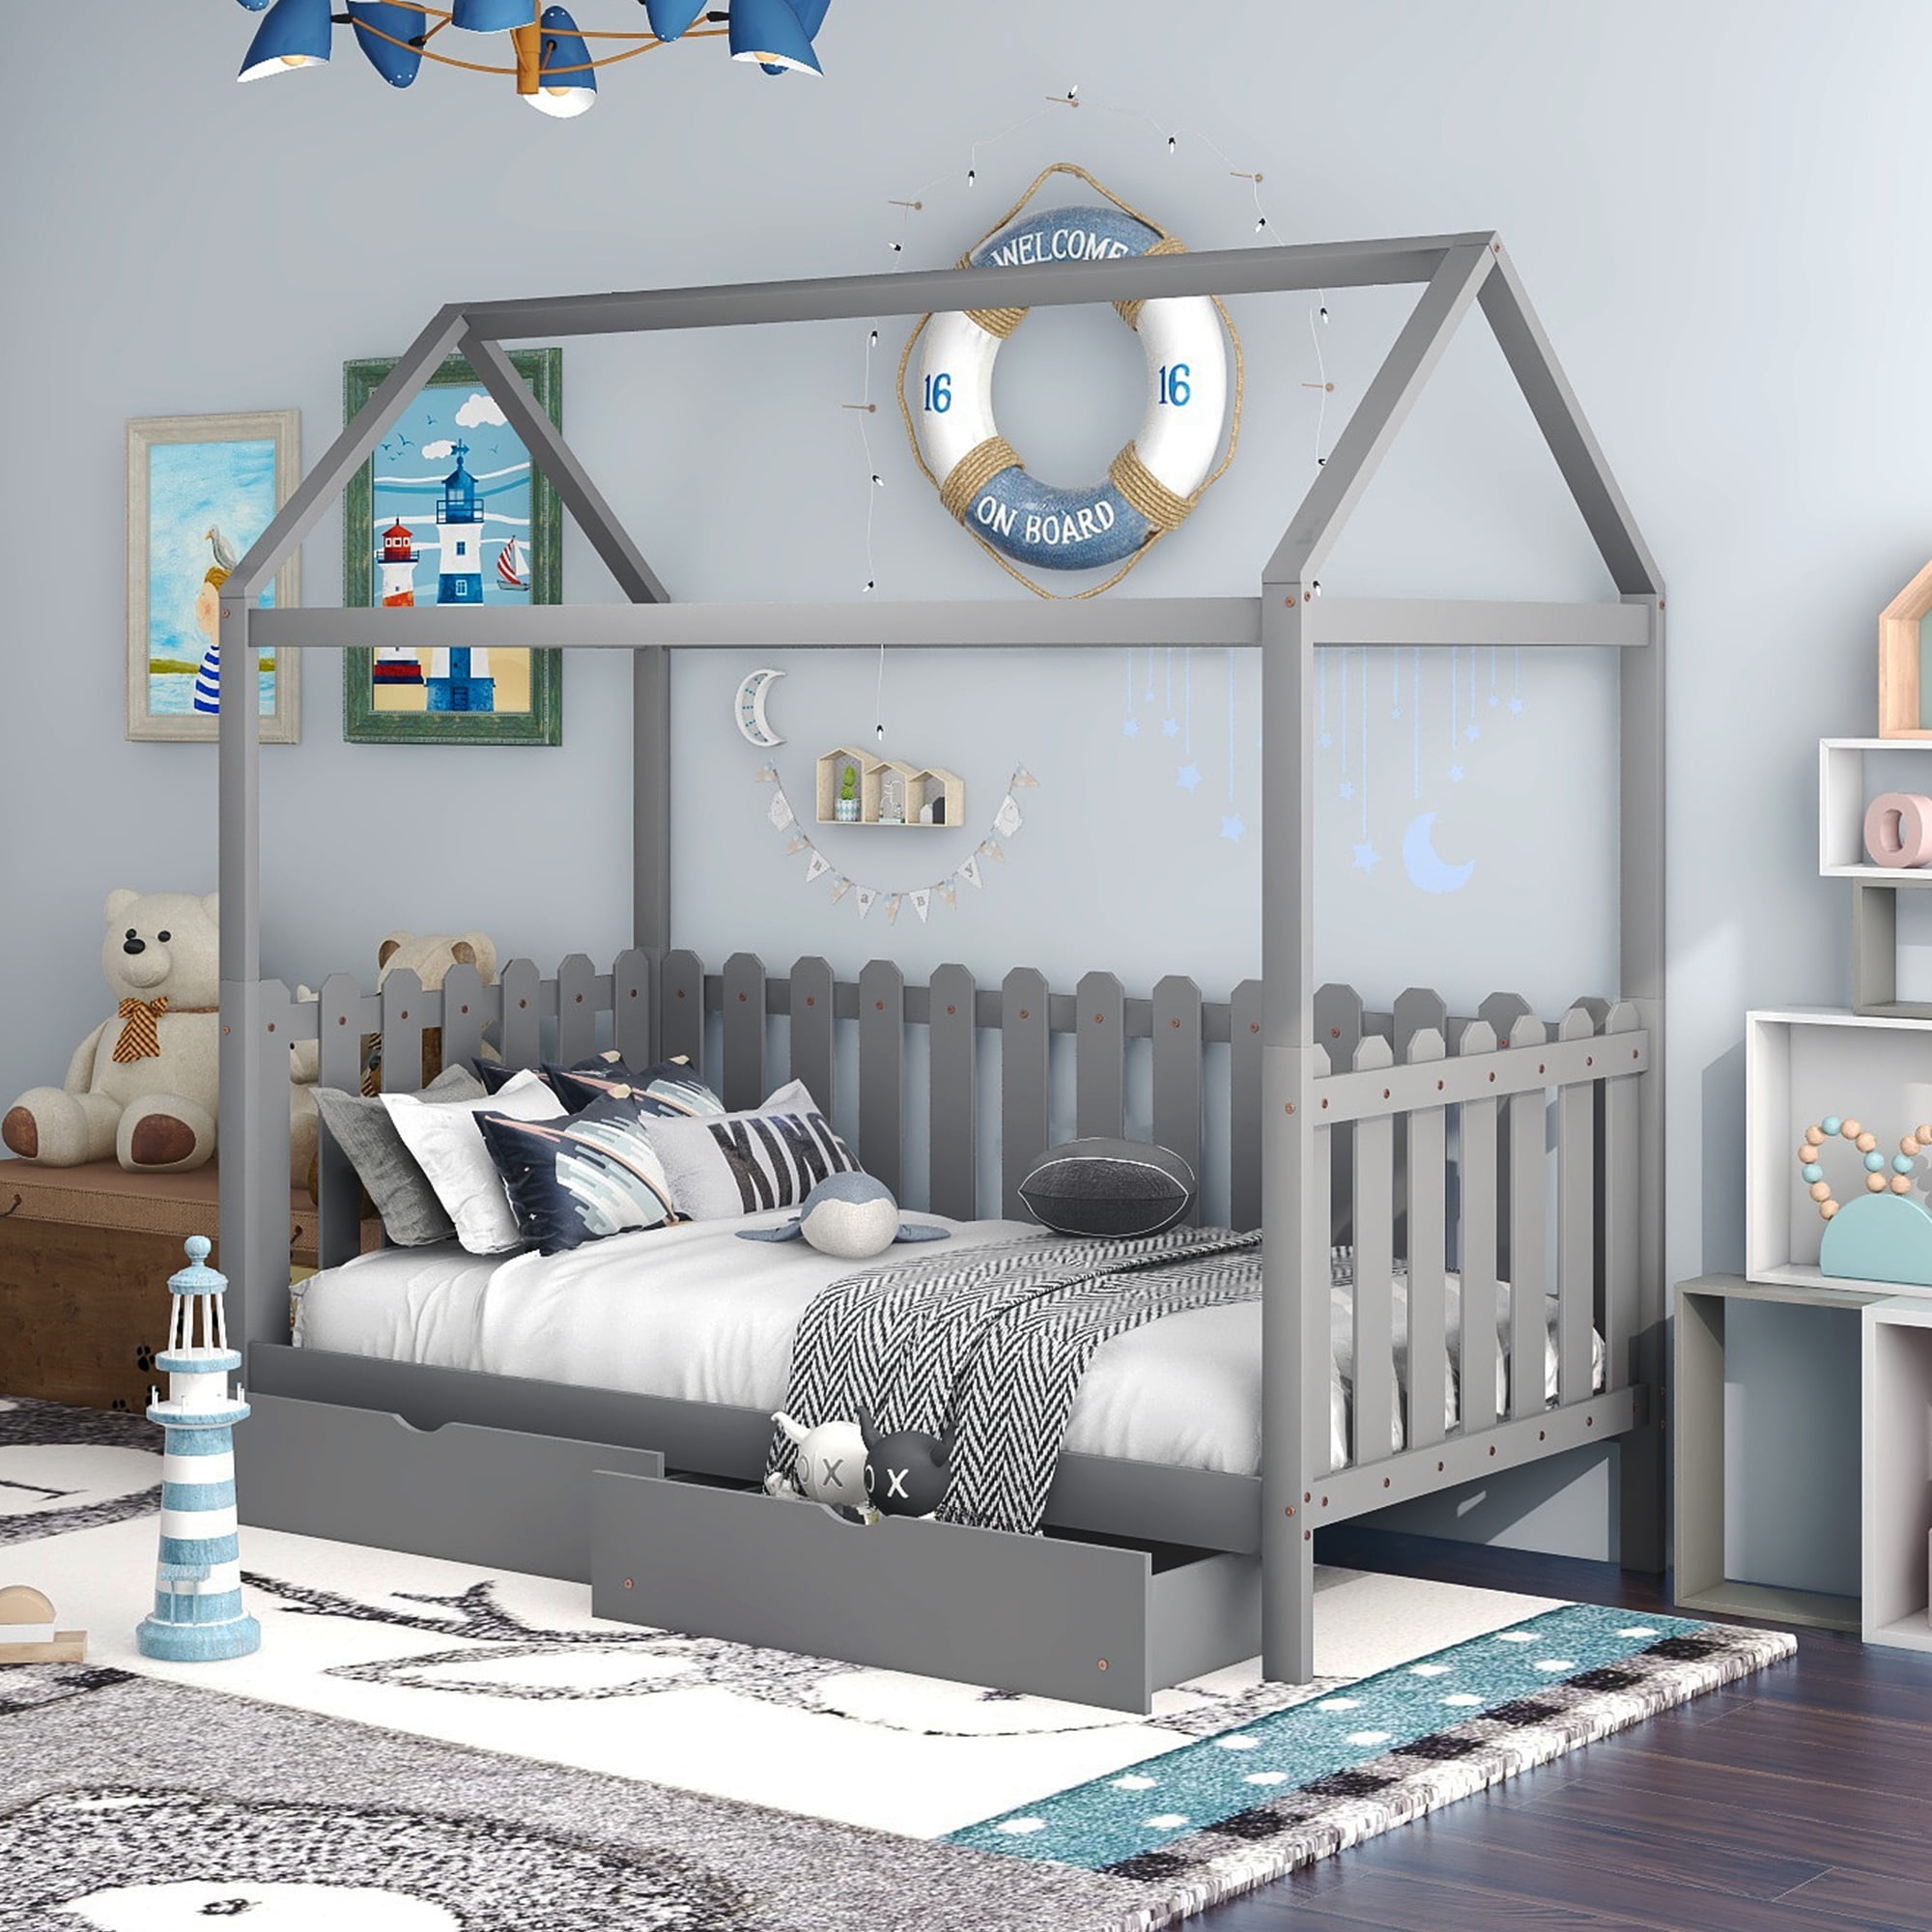 Daybed With Drawers Wood Toddler House, Beach House Bed Frame